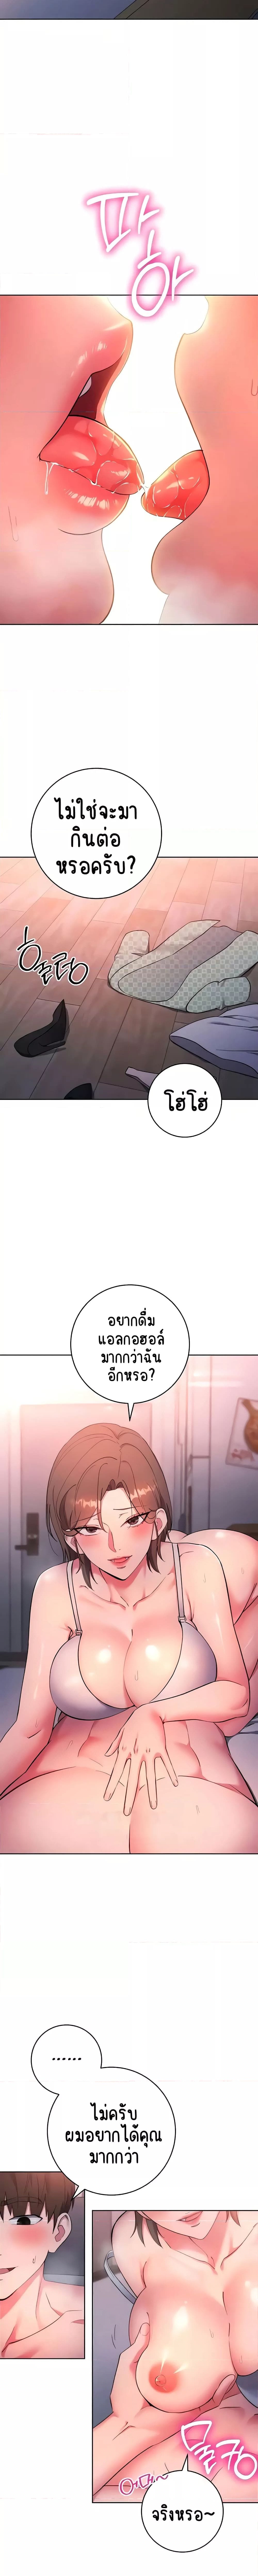 Outsider: The Invisible Man ตอนที่ 8 ภาพ 2